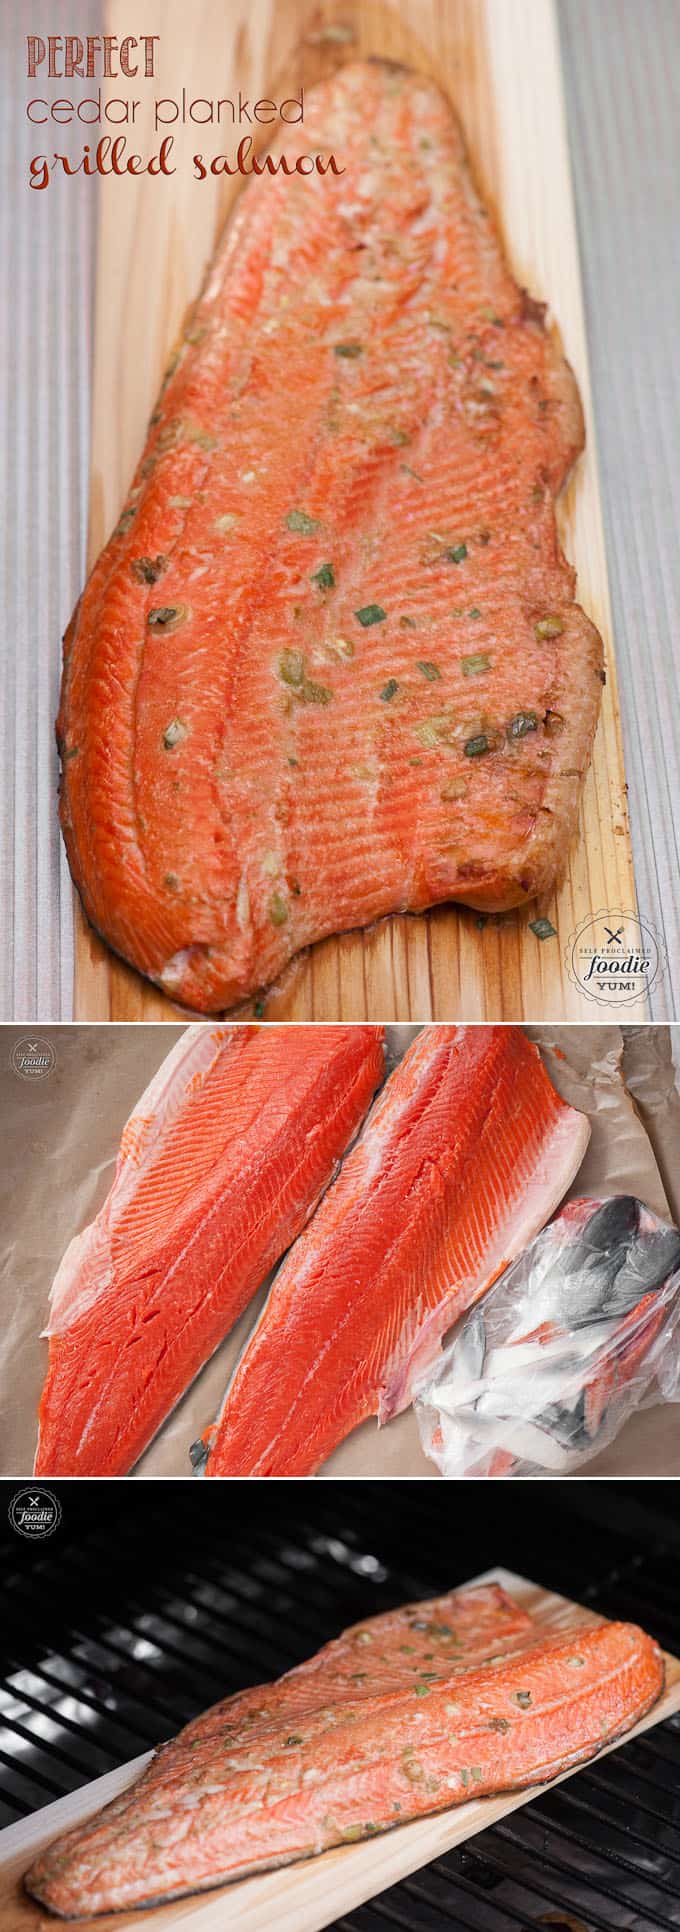 This easy Perfect Cedar Planked Grilled Salmon is wild caught Copper River Salmon marinated in a light Asian marinade grilled into a healthy summer dinner.